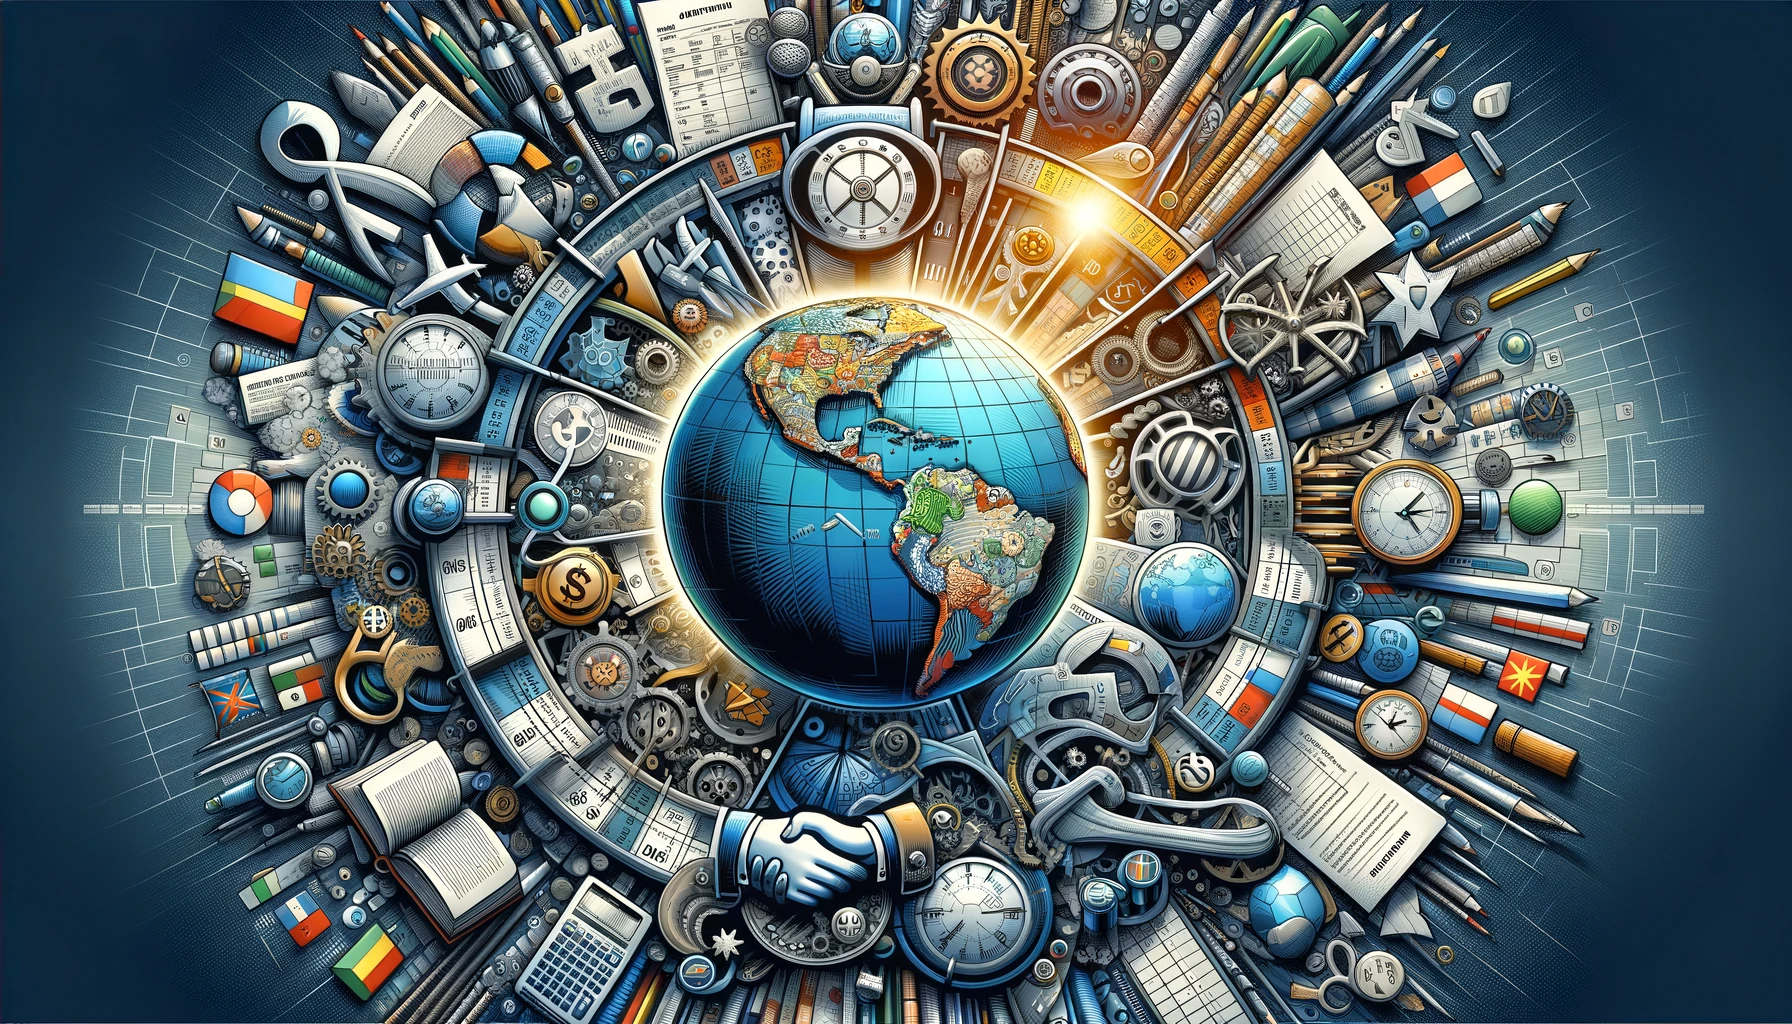 An artistic representation of the world of accounting standards and rules, showcasing a globe surrounded by various symbols representing international